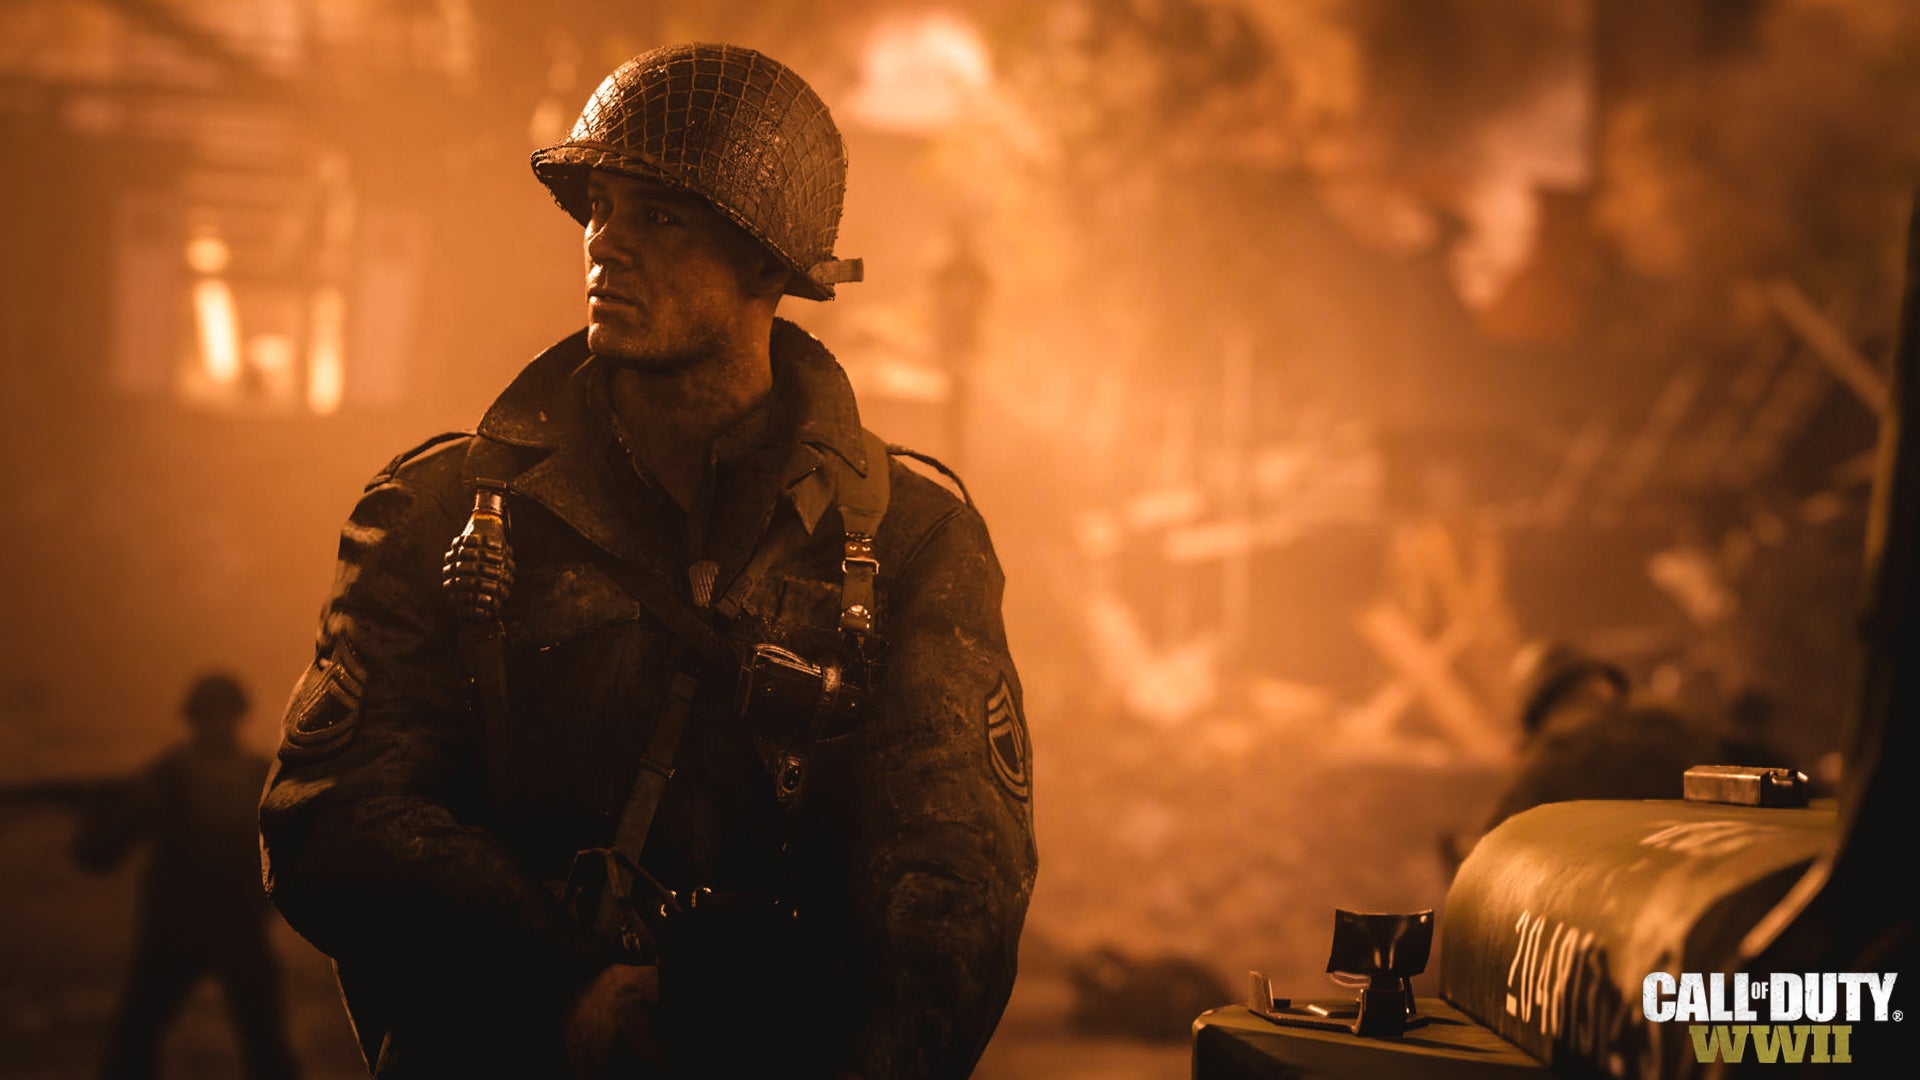 Image for Call of Duty is UK Christmas number one for fourth consecutive year, equals record set by FIFA